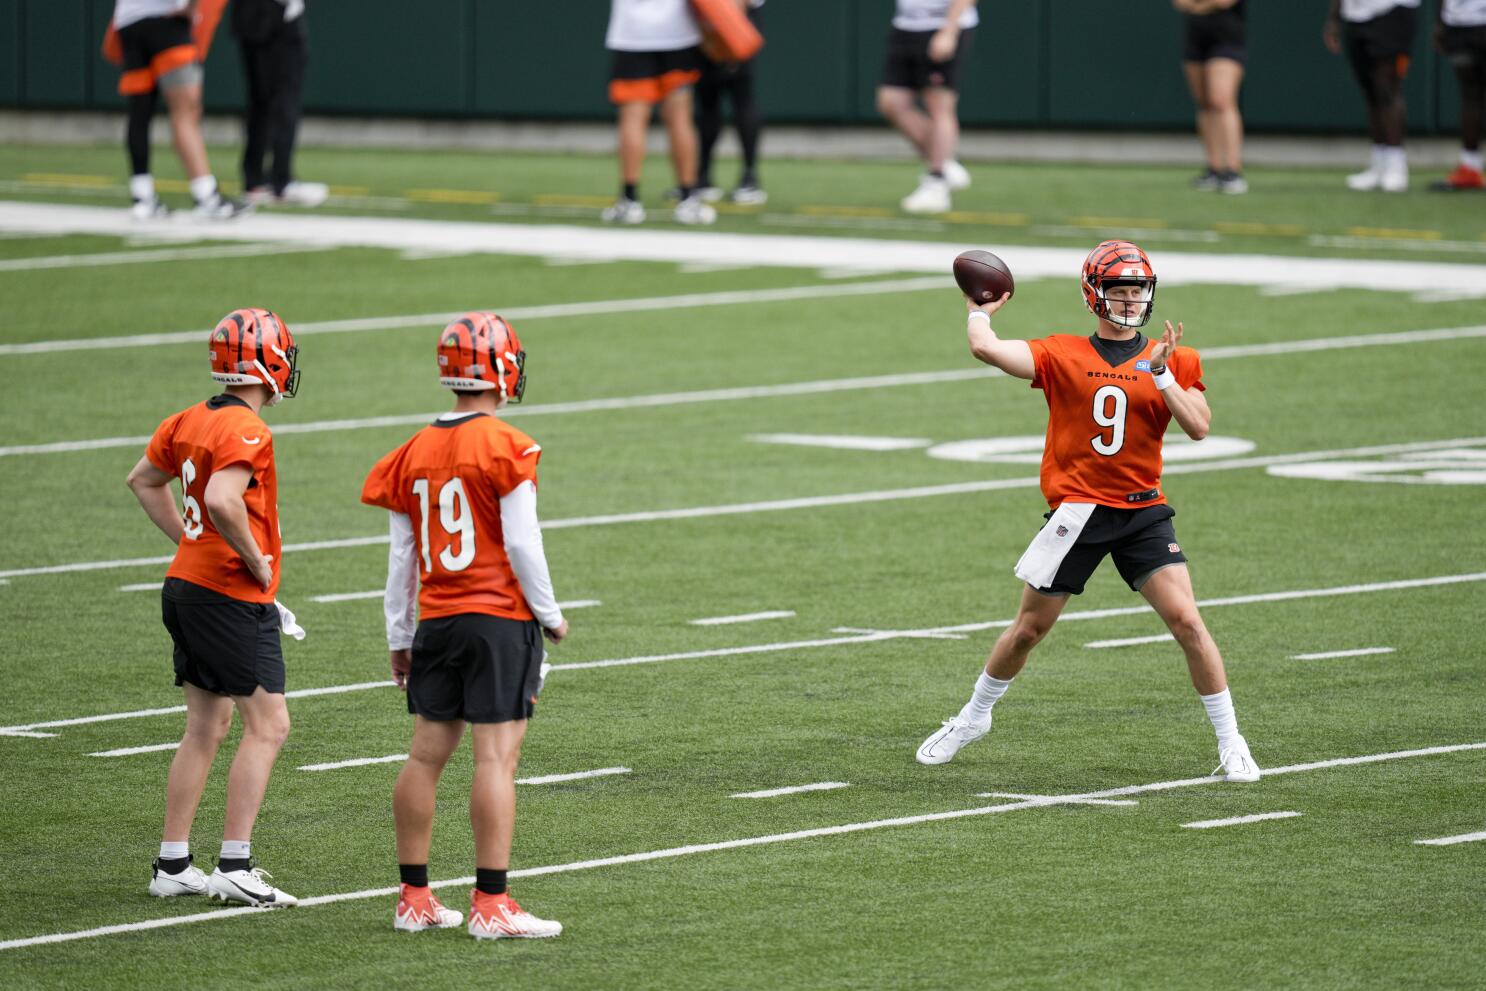 Joe Burrow's status unclear as Rams and Bengals meet for first